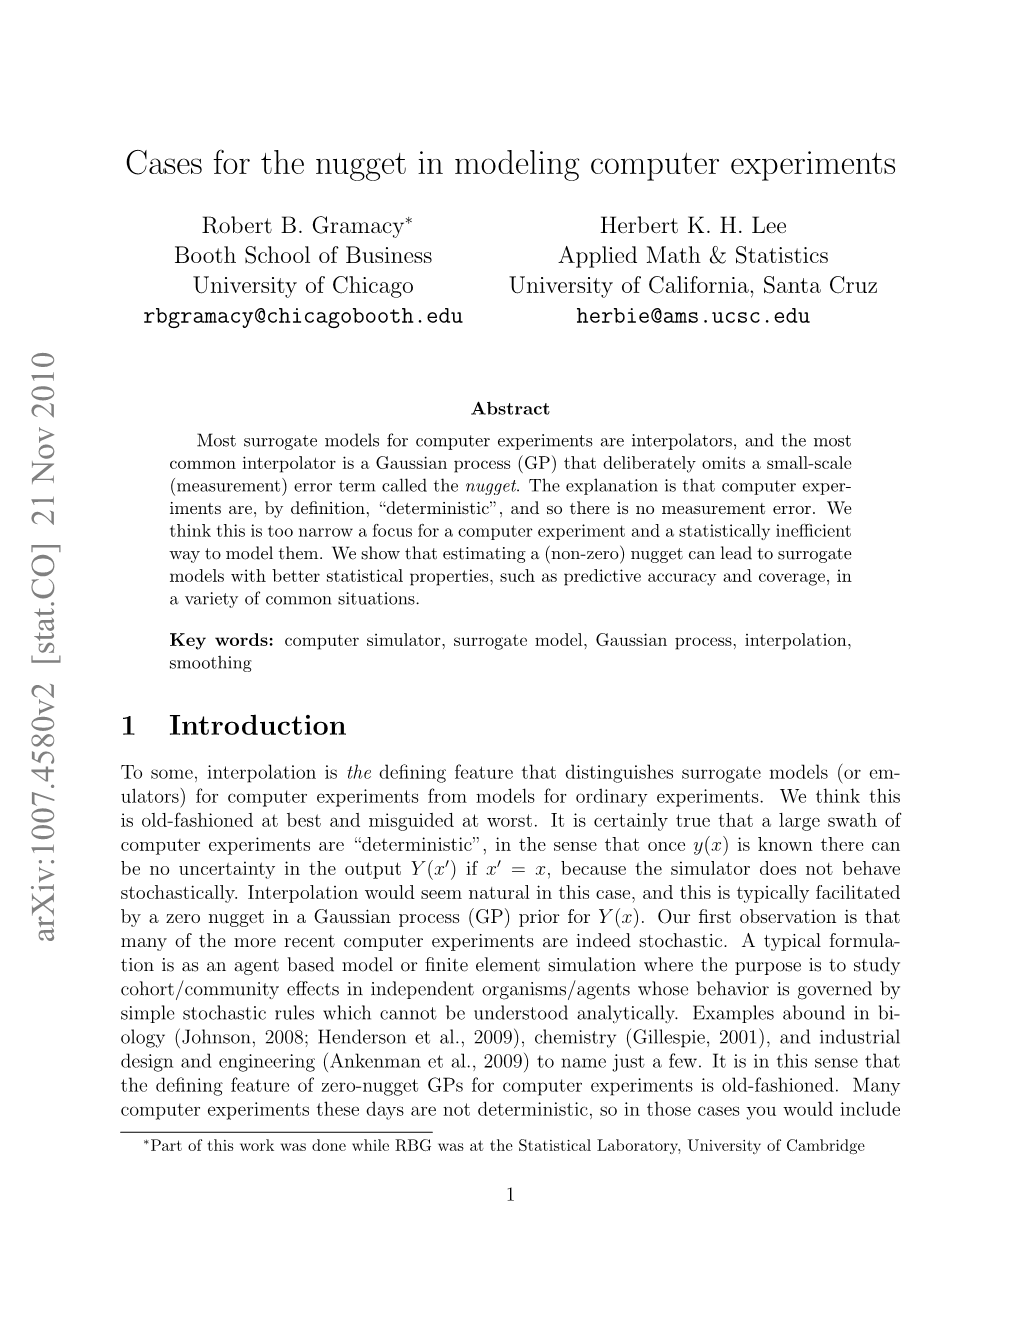 Cases for the Nugget in Modeling Computer Experiments